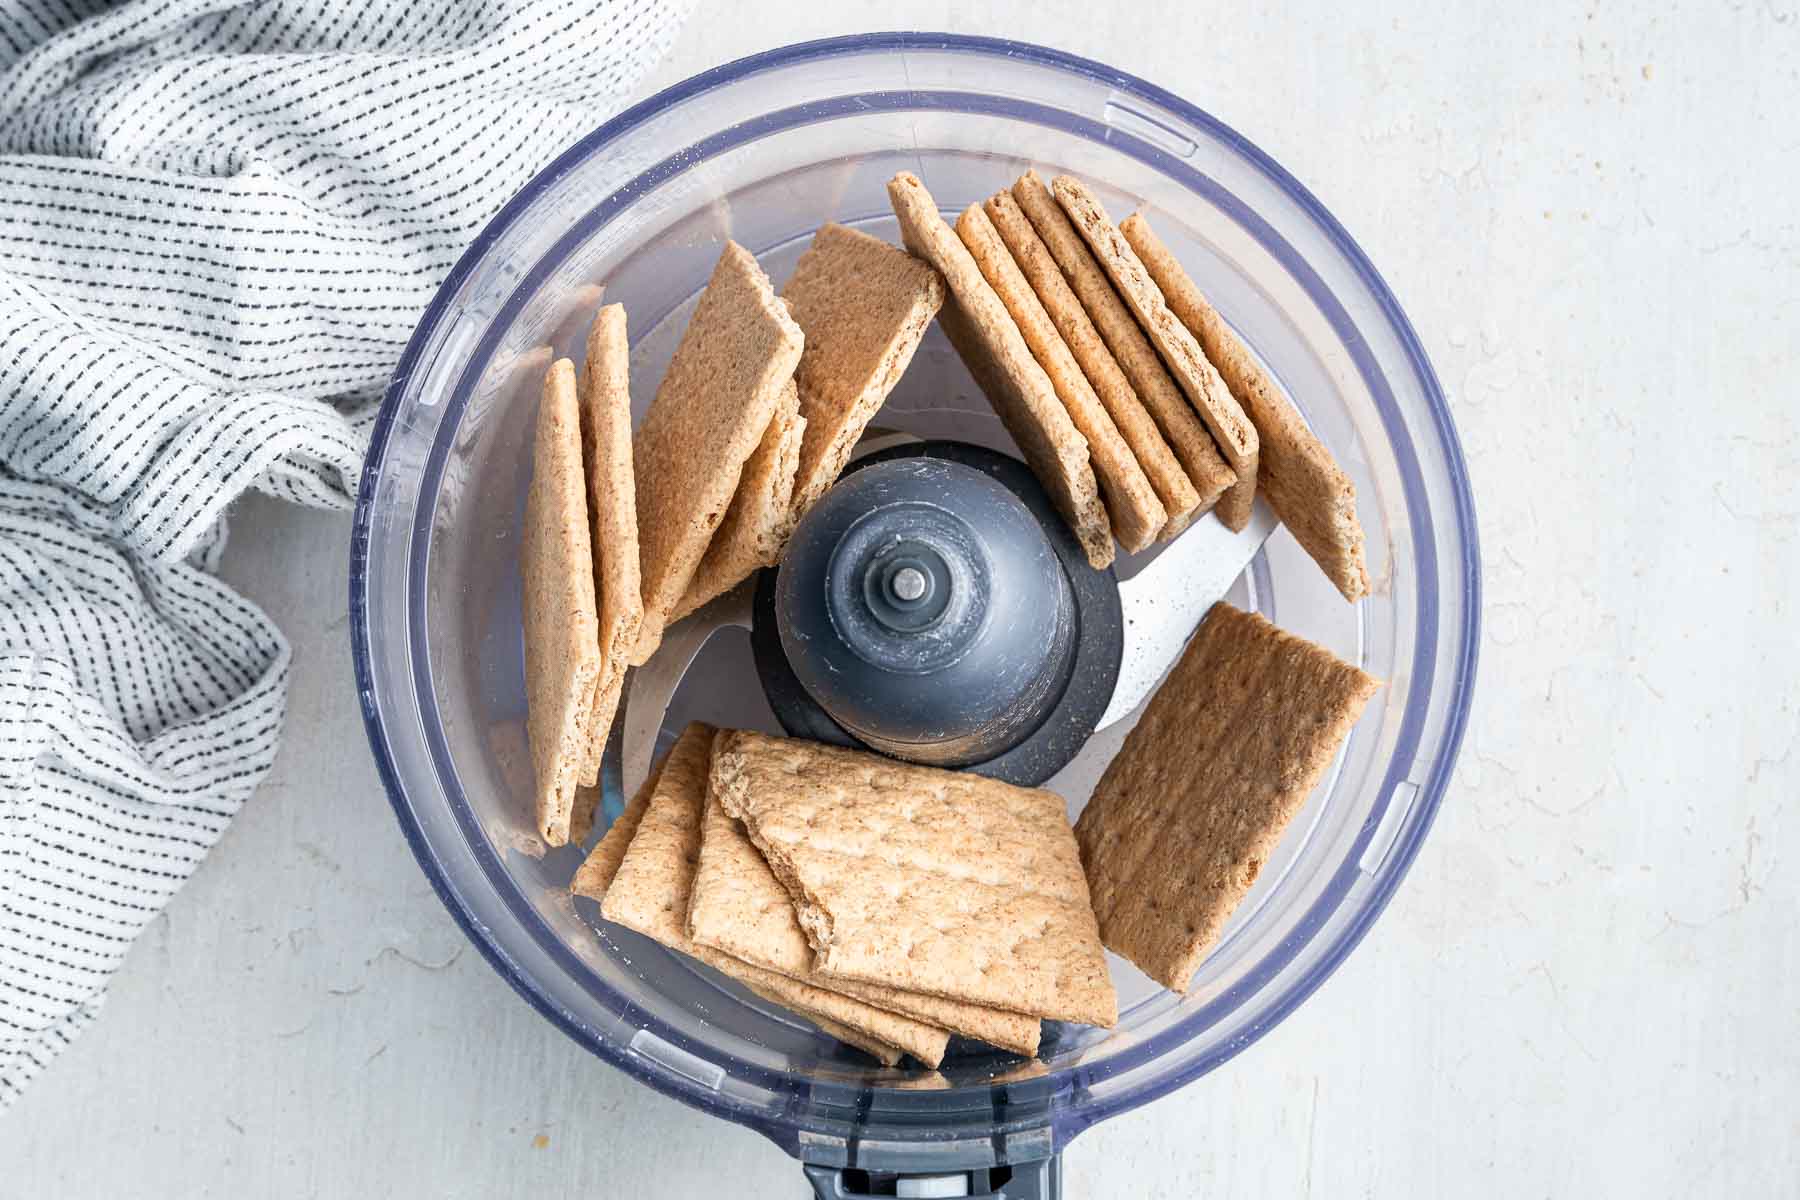 Eight whole graham crackers broken to fit into a food processor bowl.